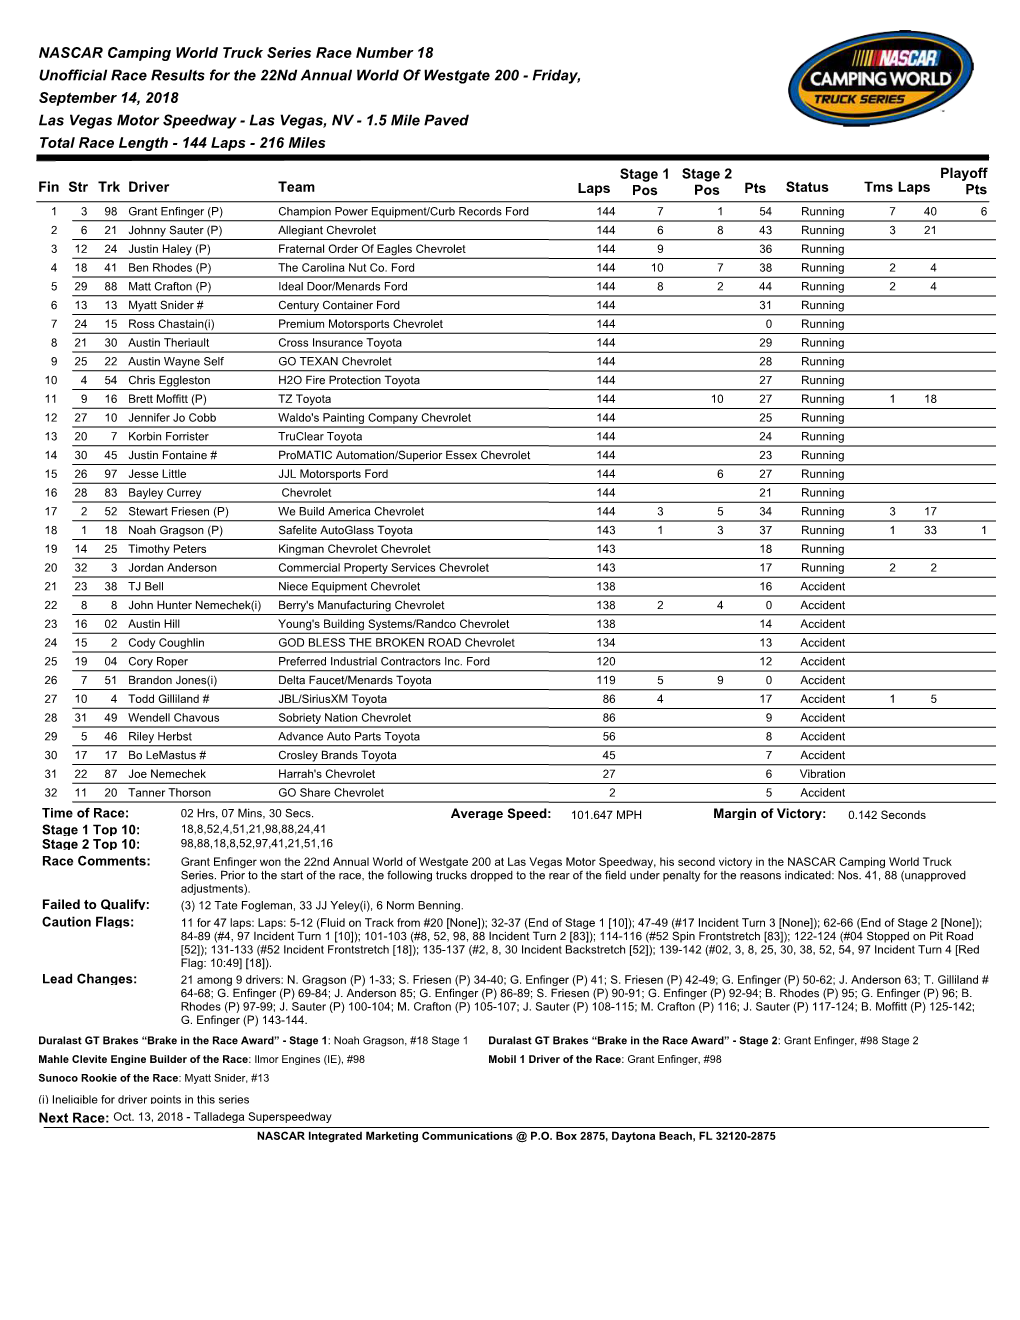 NASCAR Camping World Truck Series Race Number 18 Unofficial Race Results for the 22Nd Annual World of Westgate